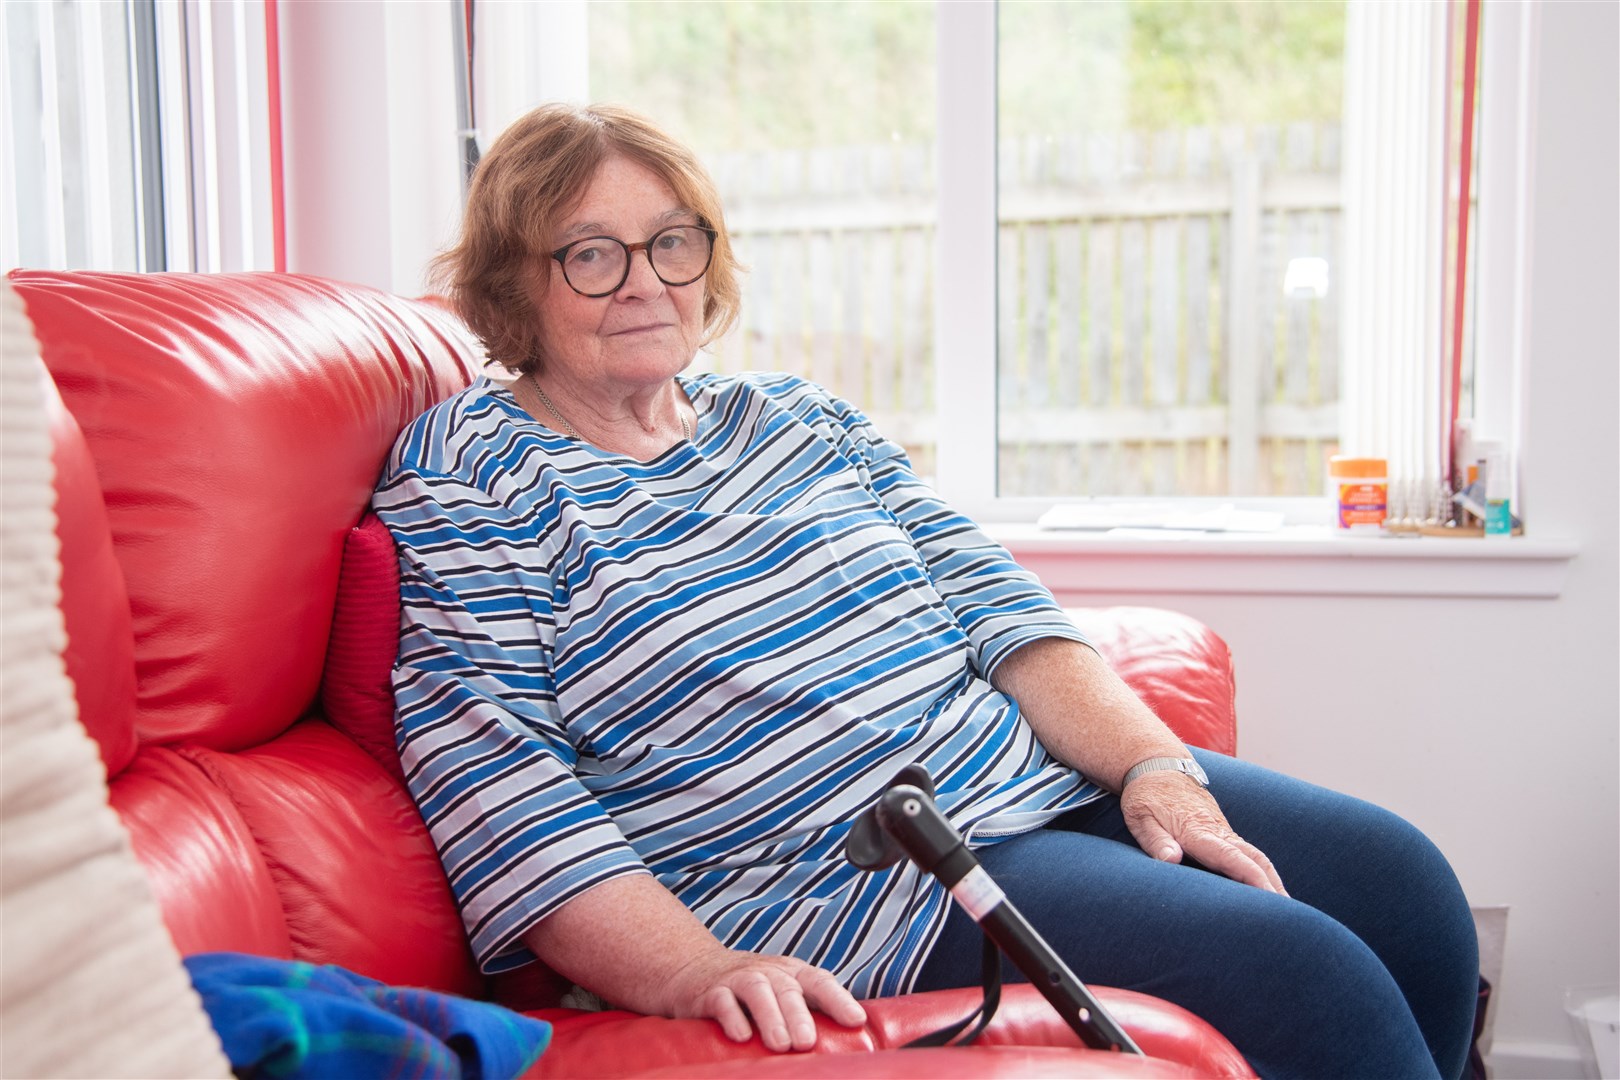 Susan's condition affects every aspect of her life, often struggling to walk more than a few steps. Picture: Daniel Forsyth